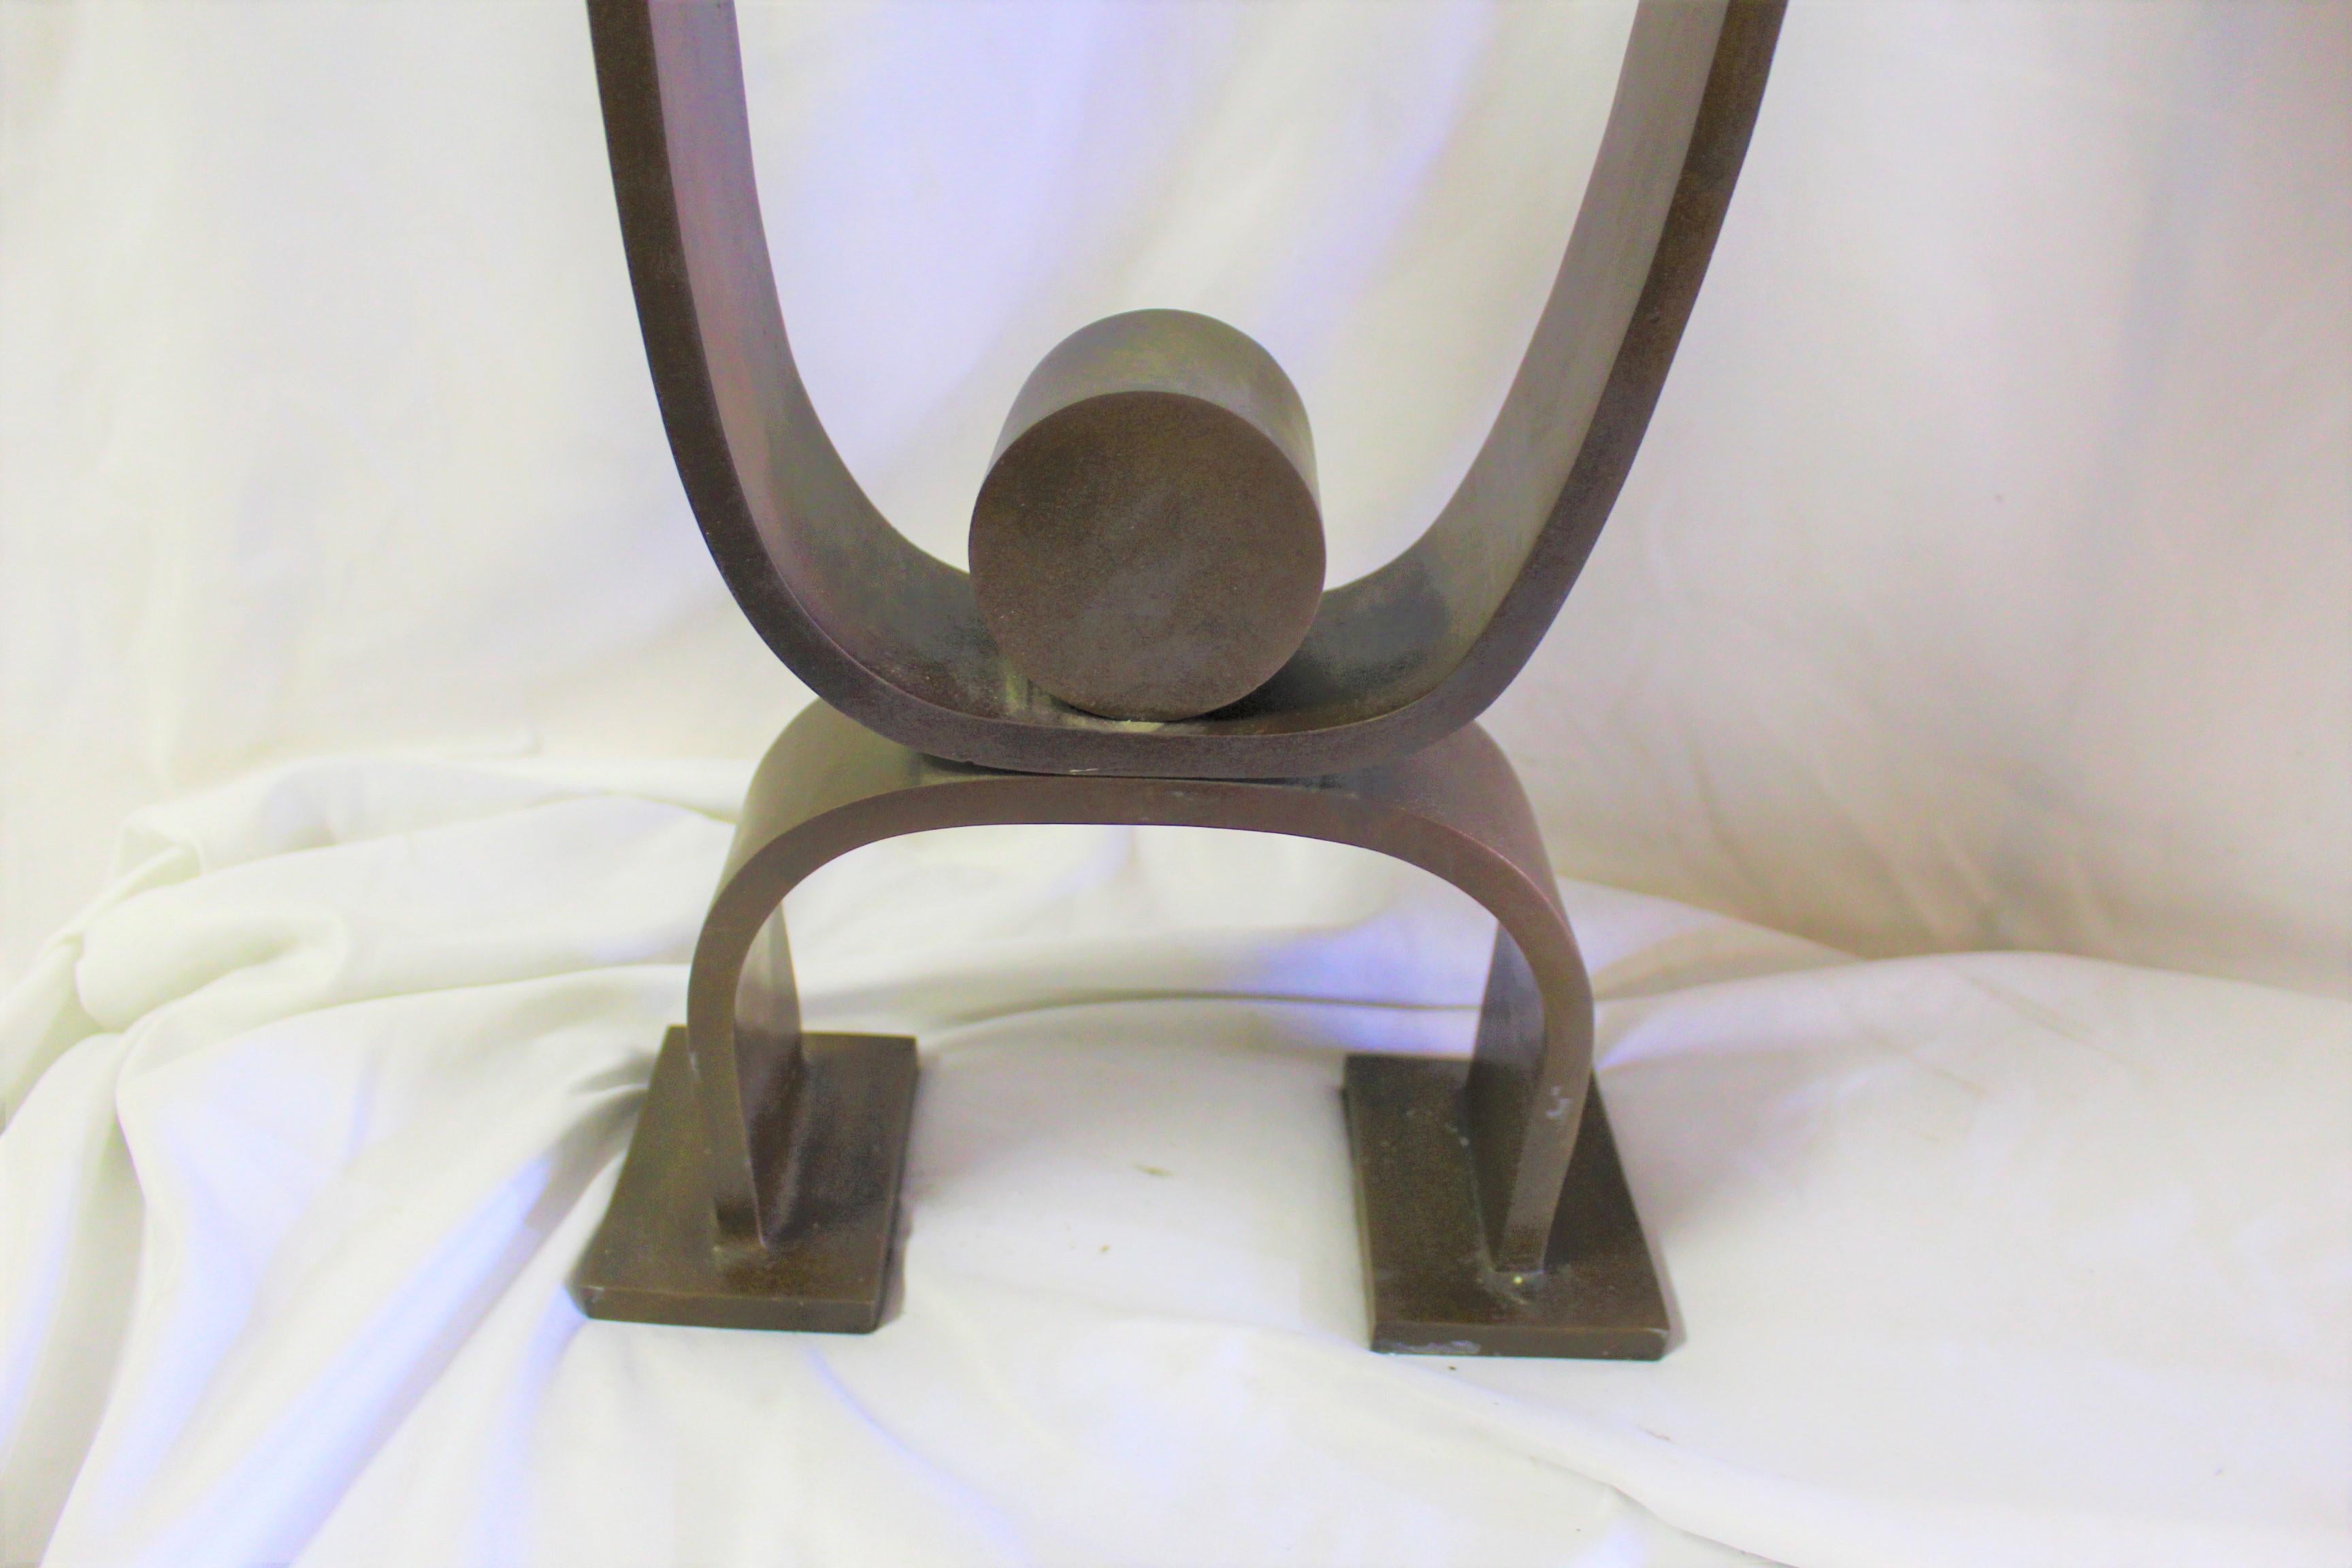 A good Deco looking Andiron after the design of Donald Deskey. Heavy steel with bronze patina finish. Custom made (sample) for a Lighting Showroom. Height is at 22